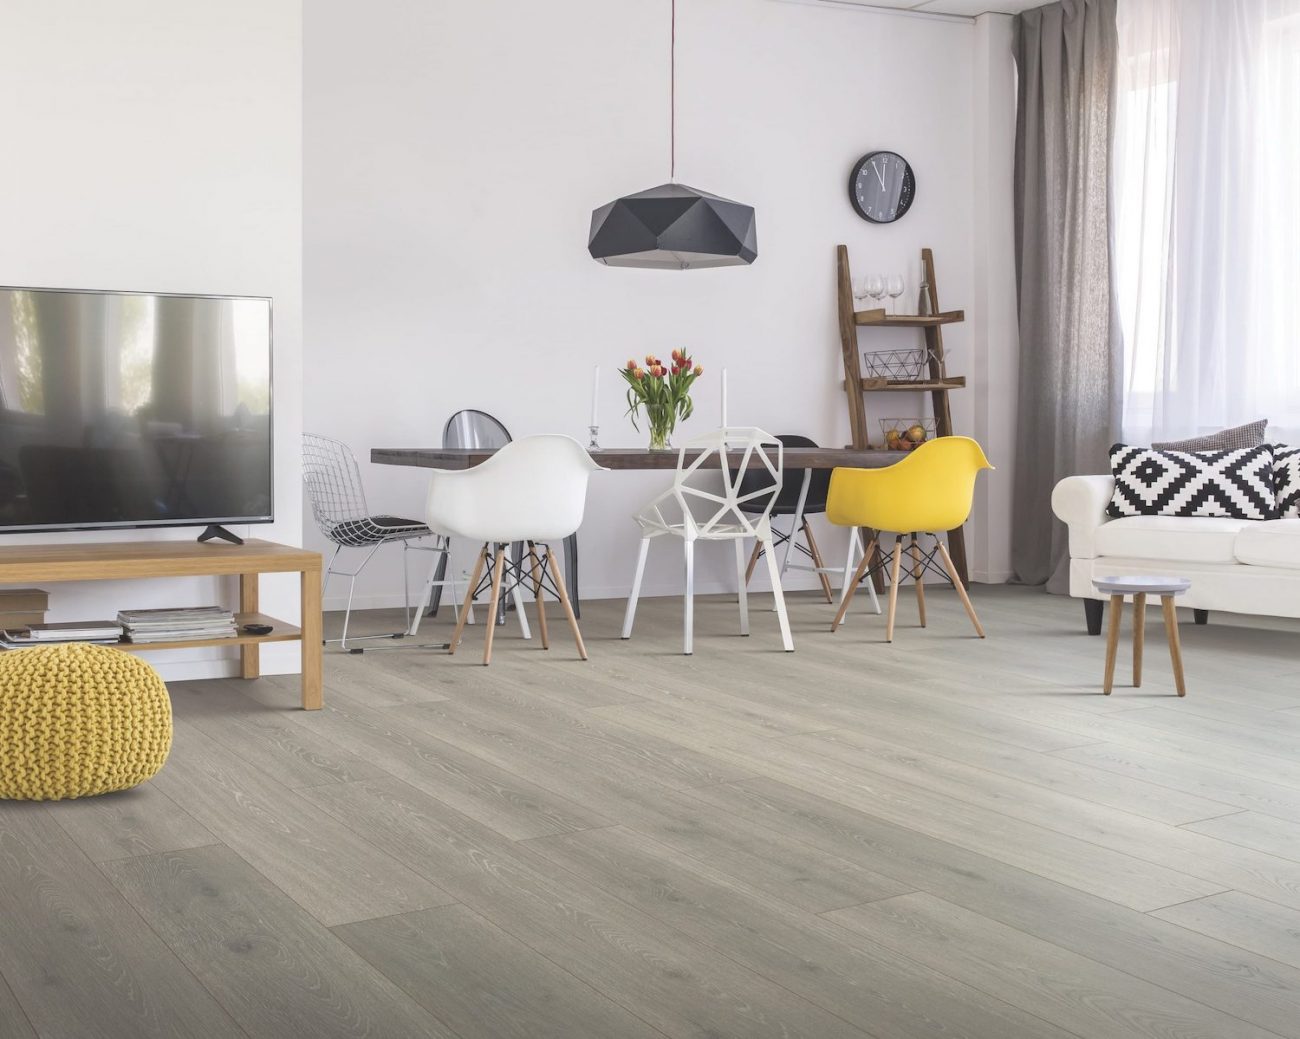 Mohawk Laminate Flooring For Your Home Improvements